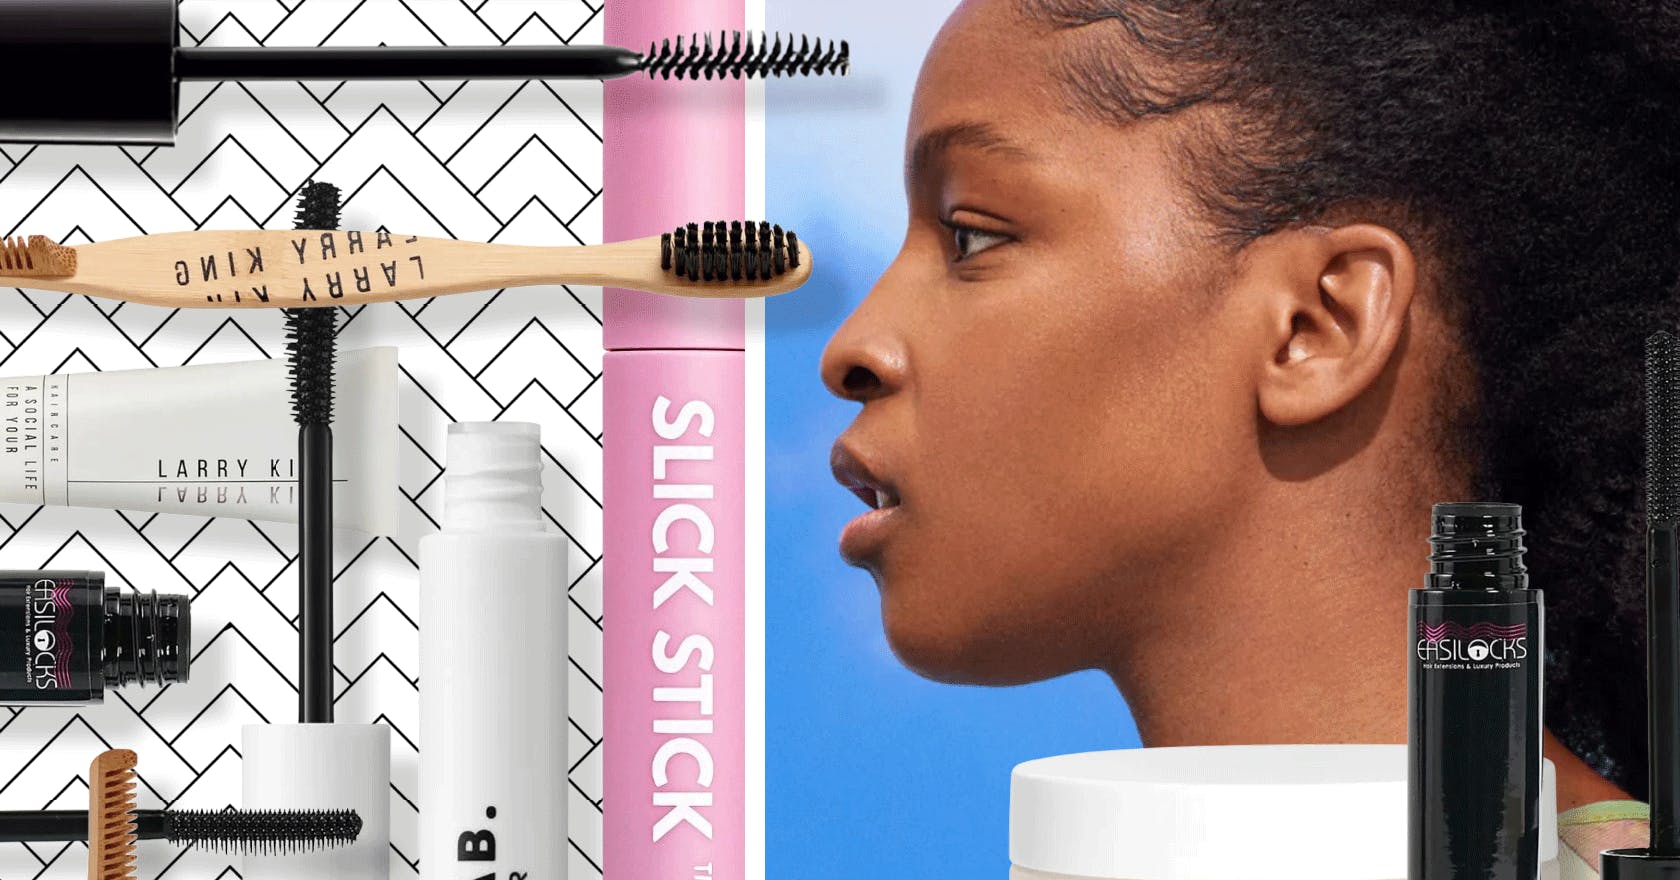 7 best flyaway sticks and edge tamers to add to your hair routine - Stylist Magazine